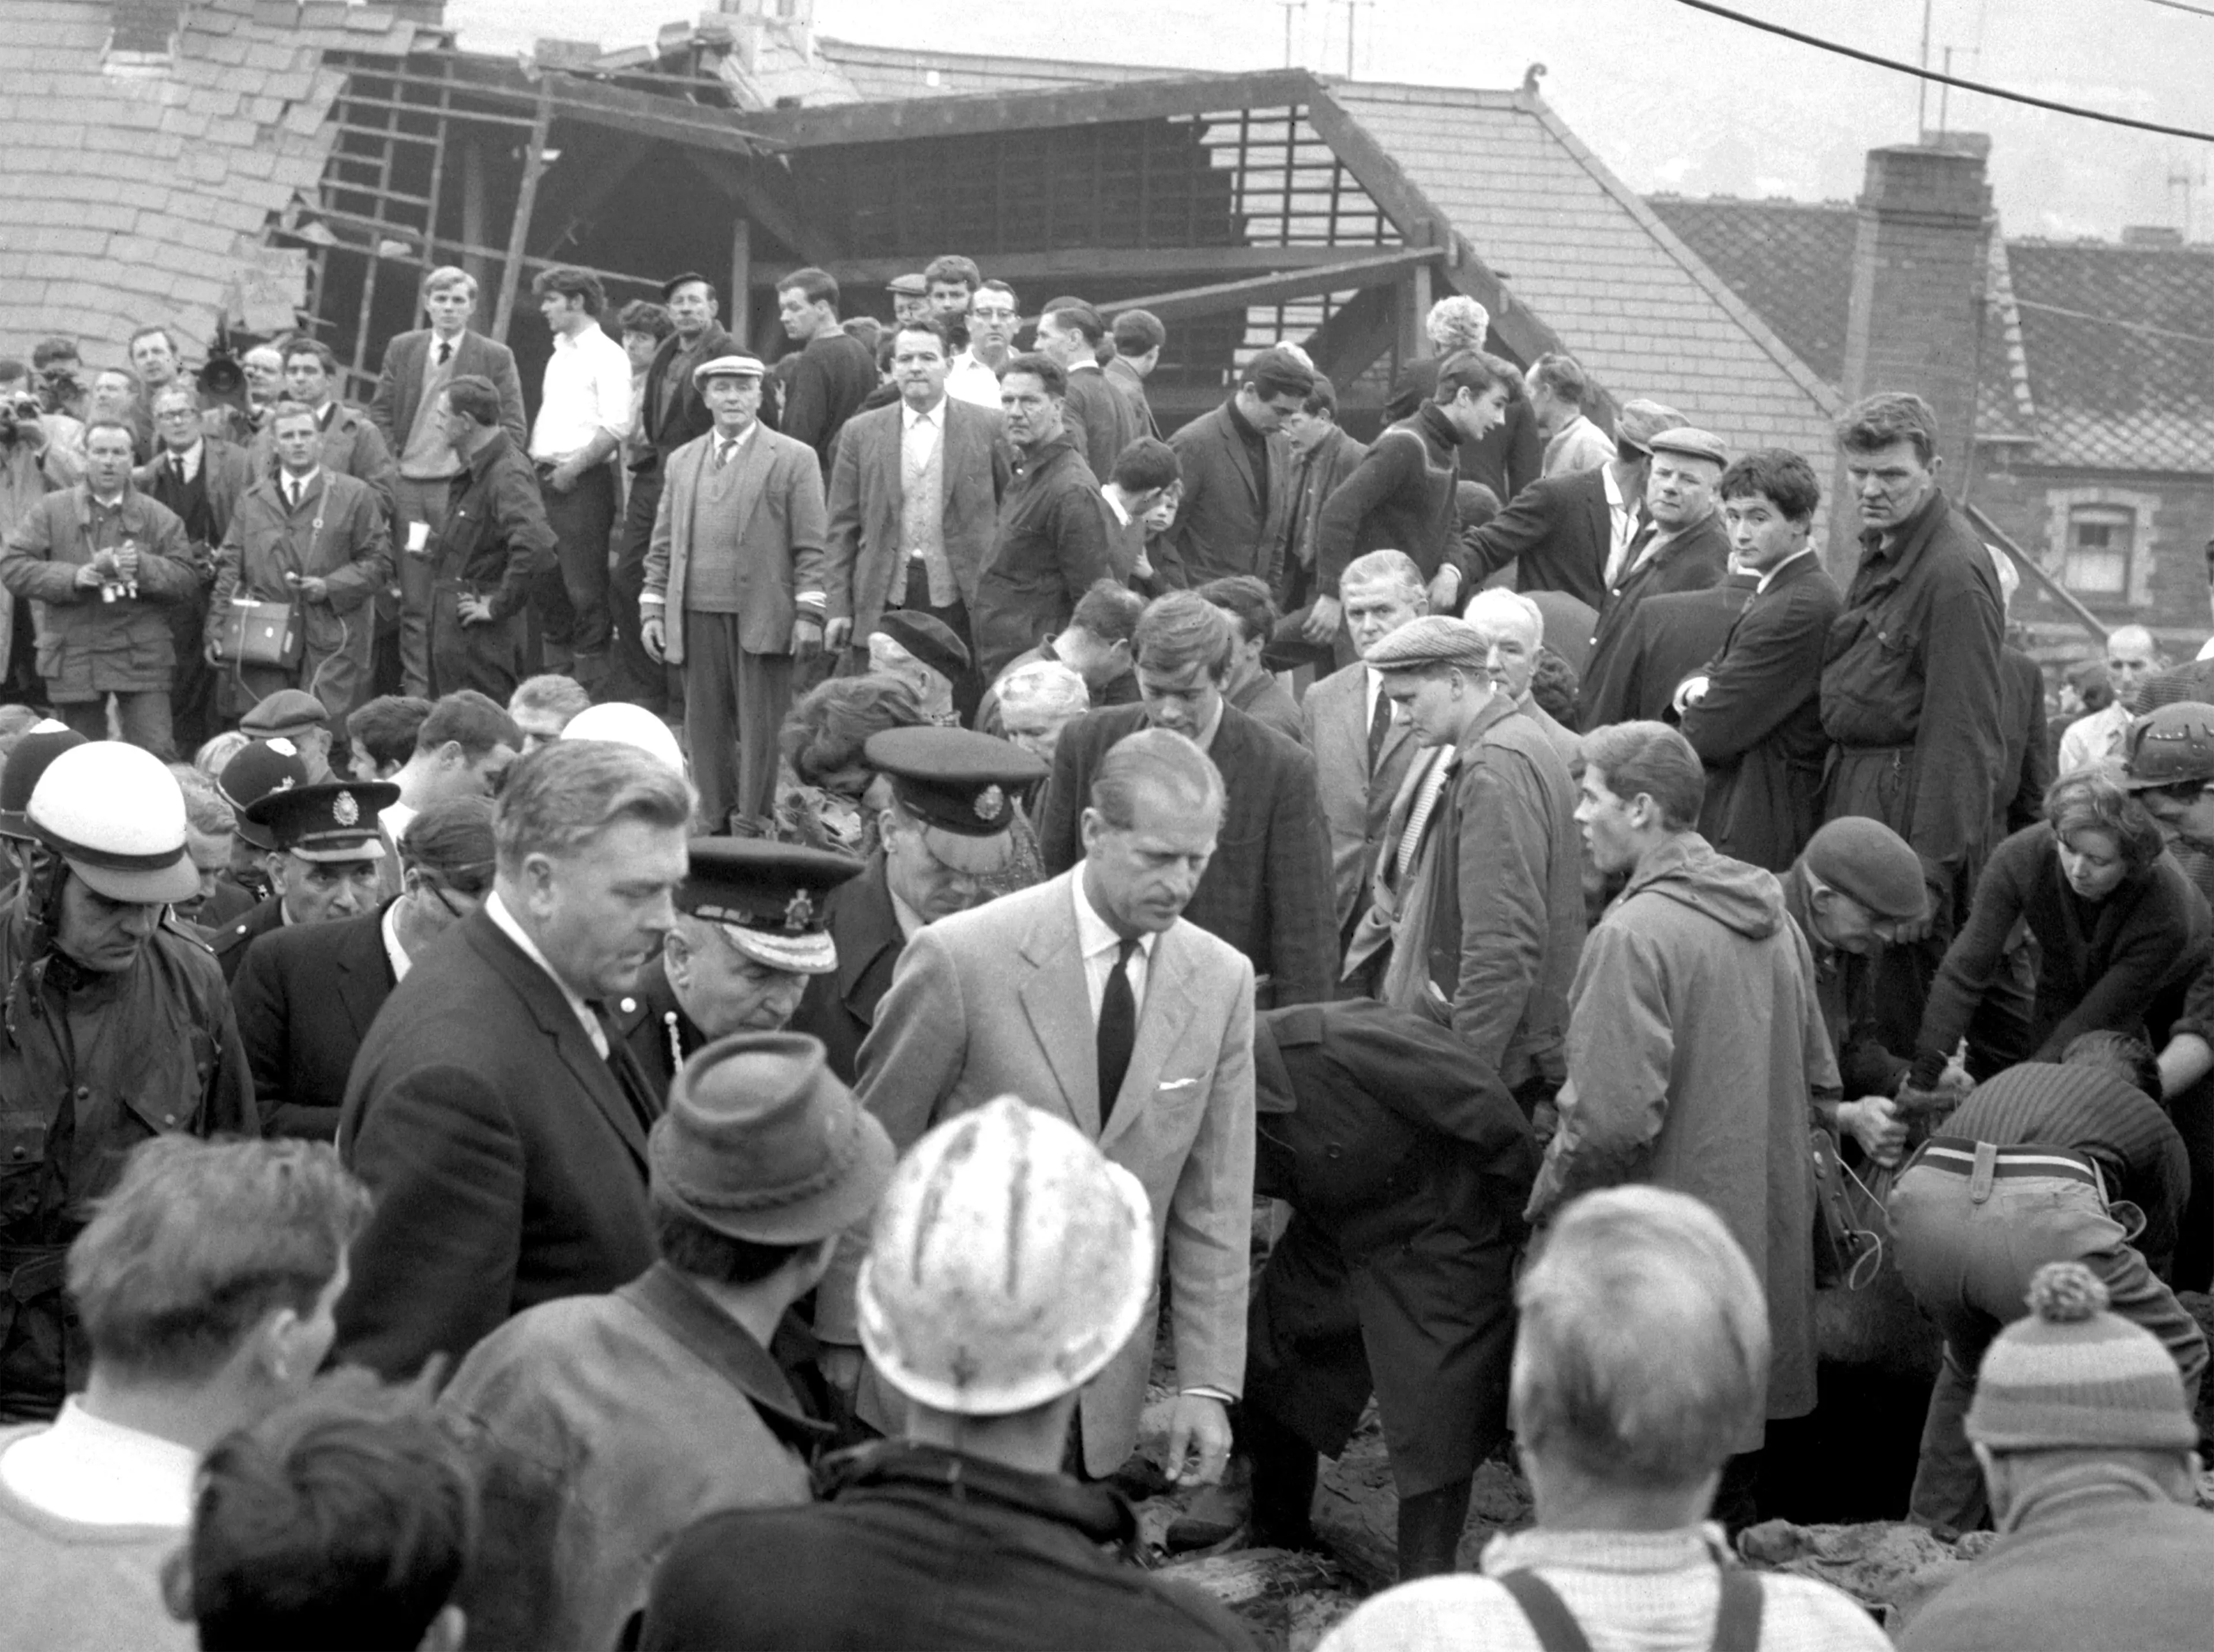 The Duke of Edinburgh visiting the disaster the following day. (